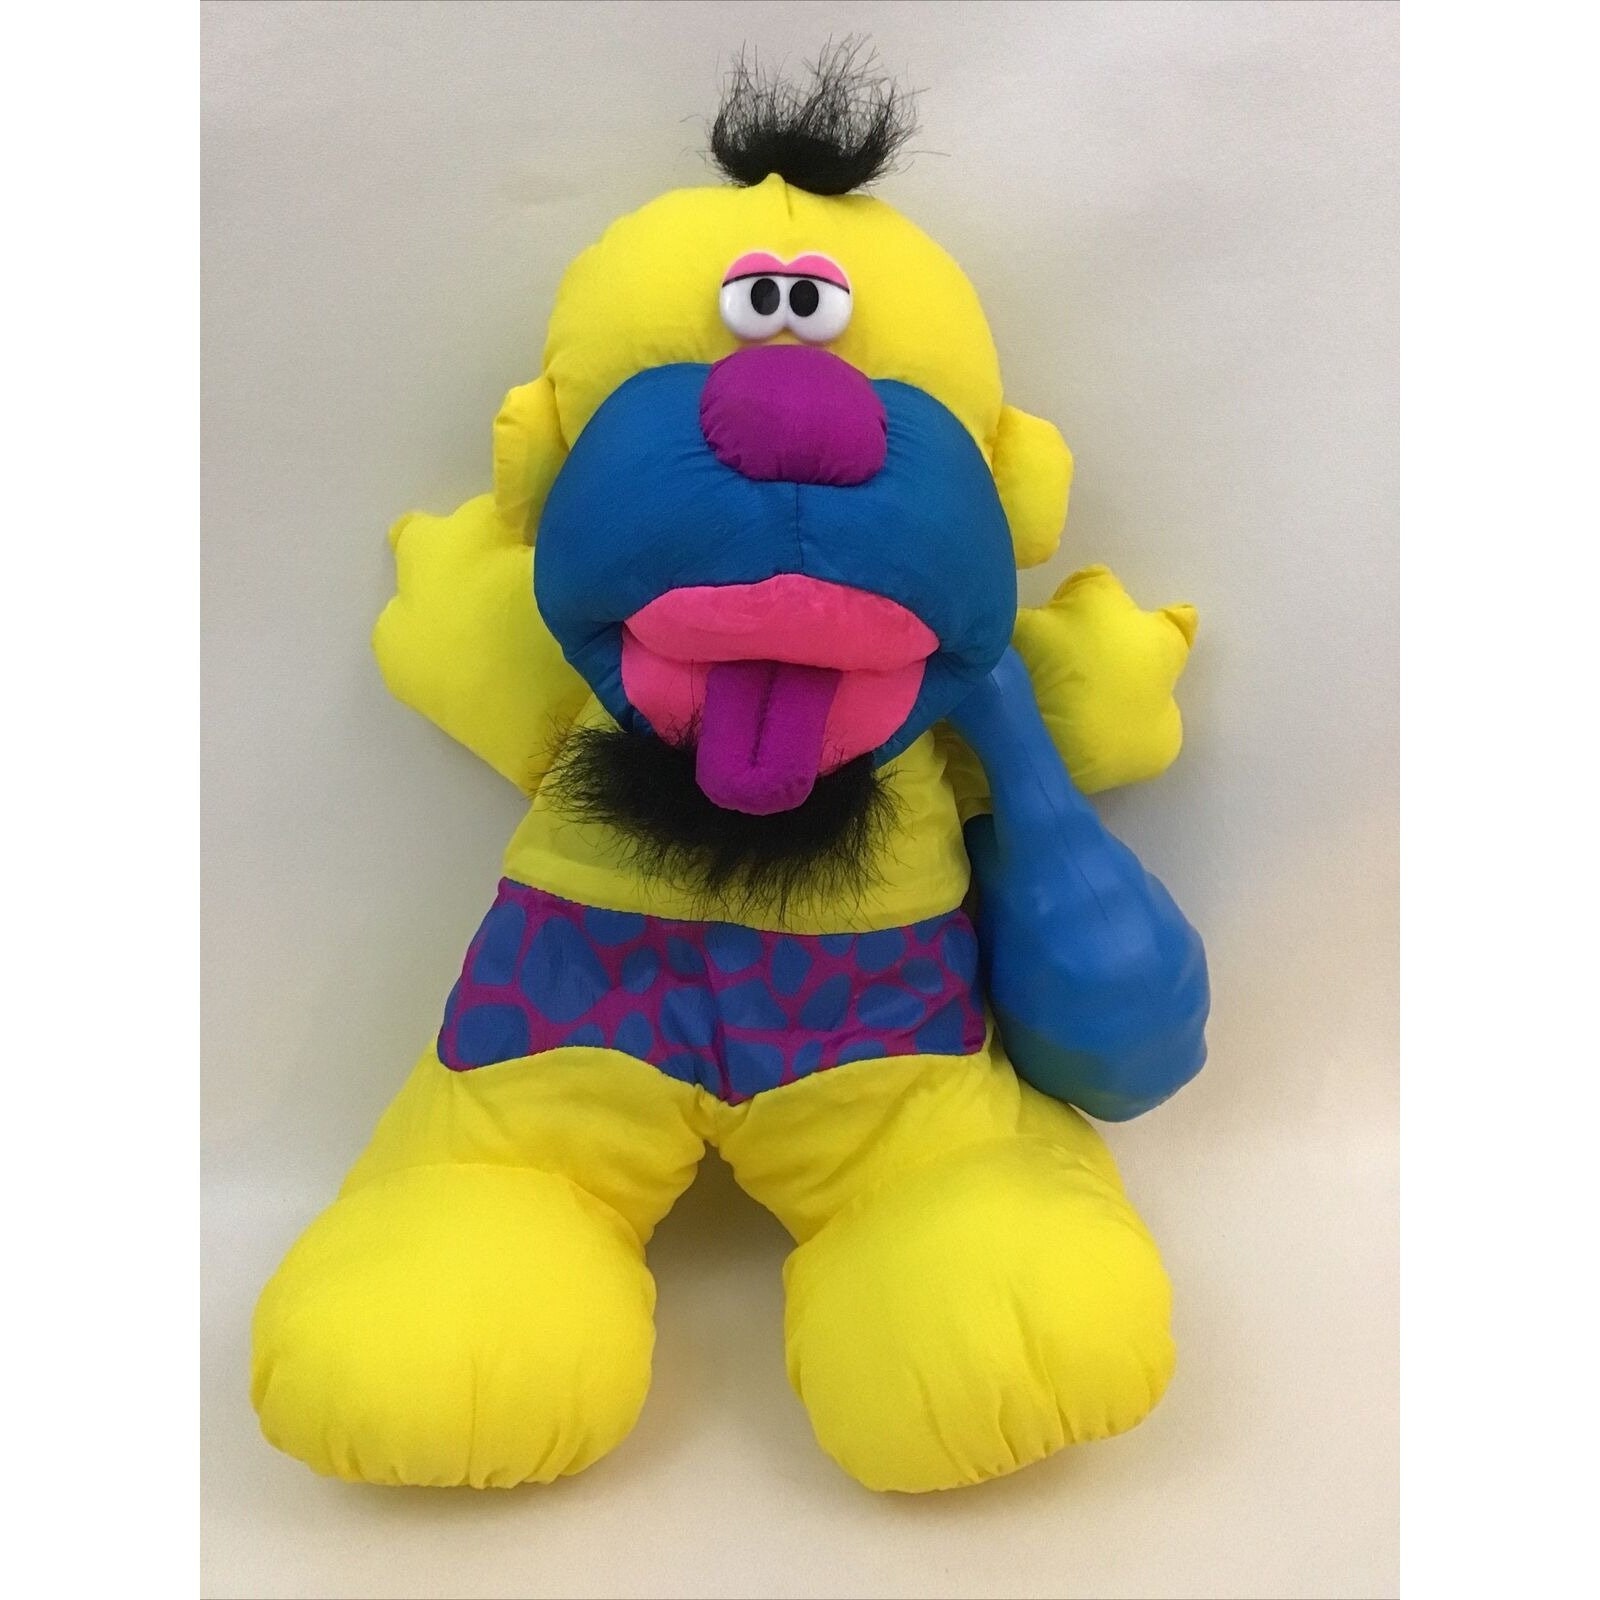 Grunts of the Madness Combat 129 33 Cm Plush Toy 